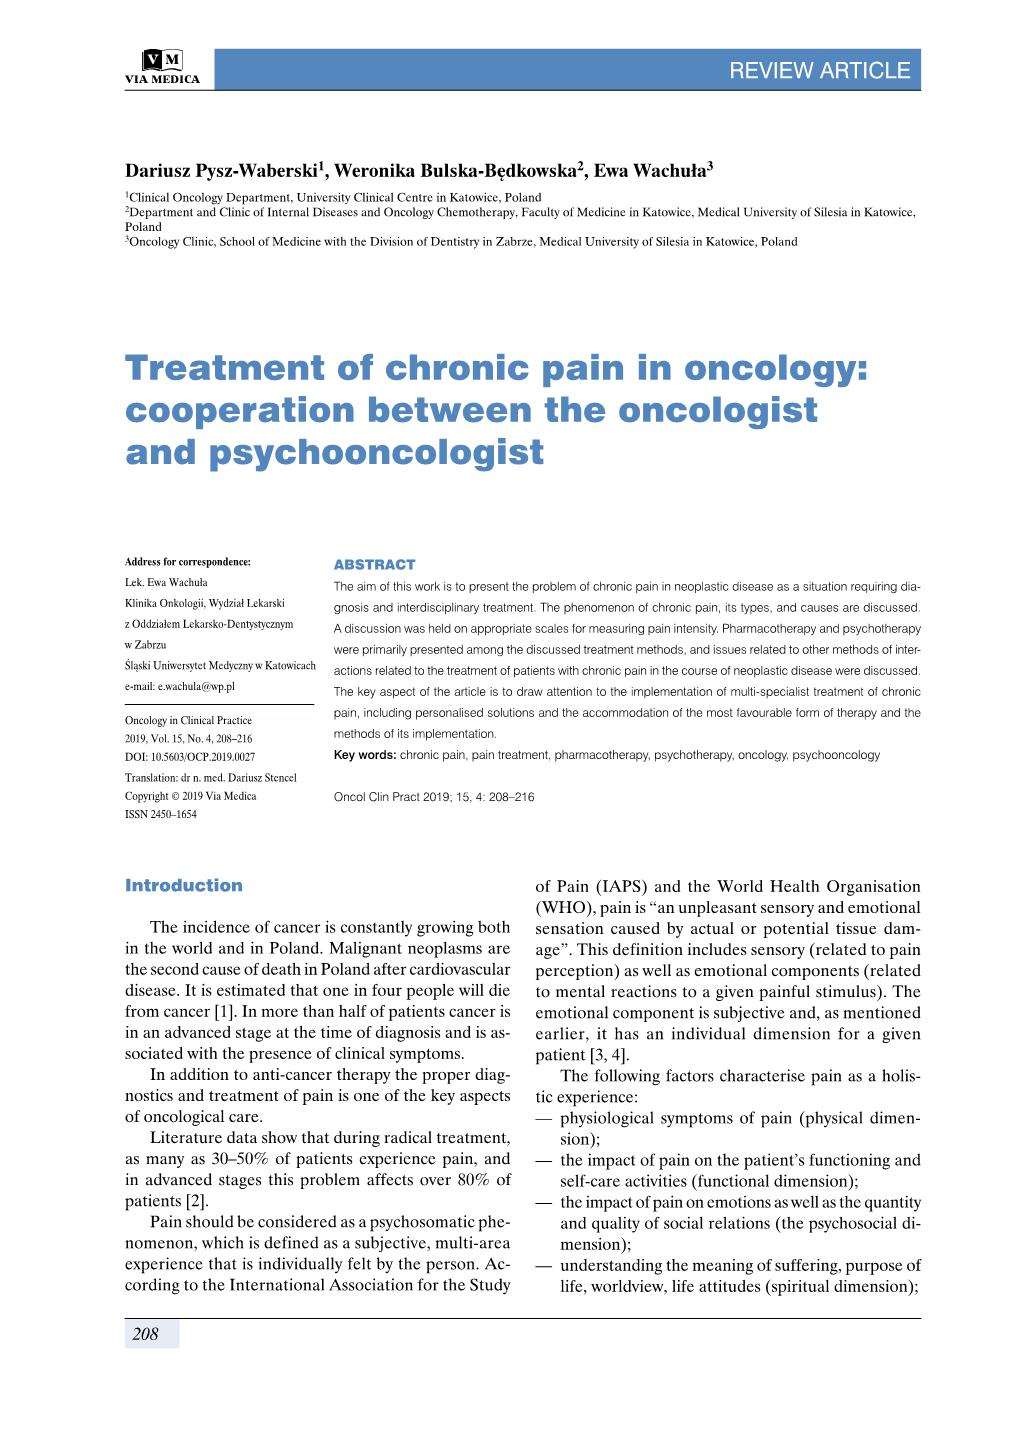 Treatment of Chronic Pain in Oncology: Cooperation Between the Oncologist and Psychooncologist